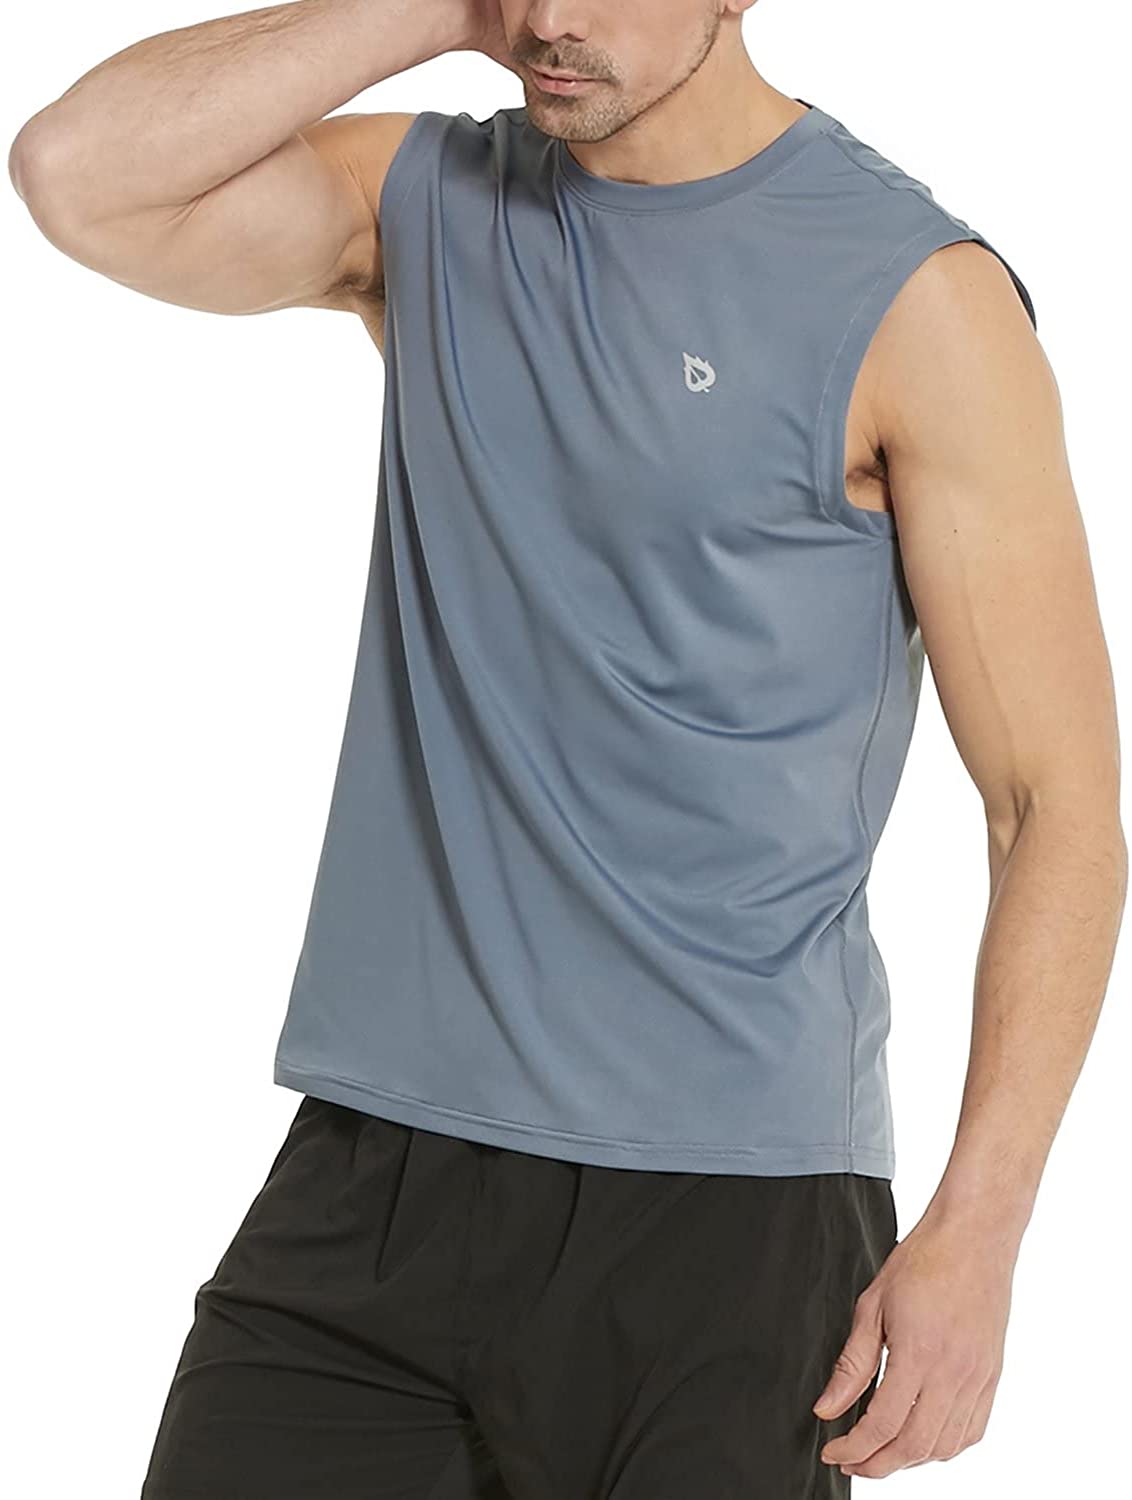 BALEAF Mens Sleeveless Compression Shirt Dry Cool Muscle Tank Tops Workout Undershirt